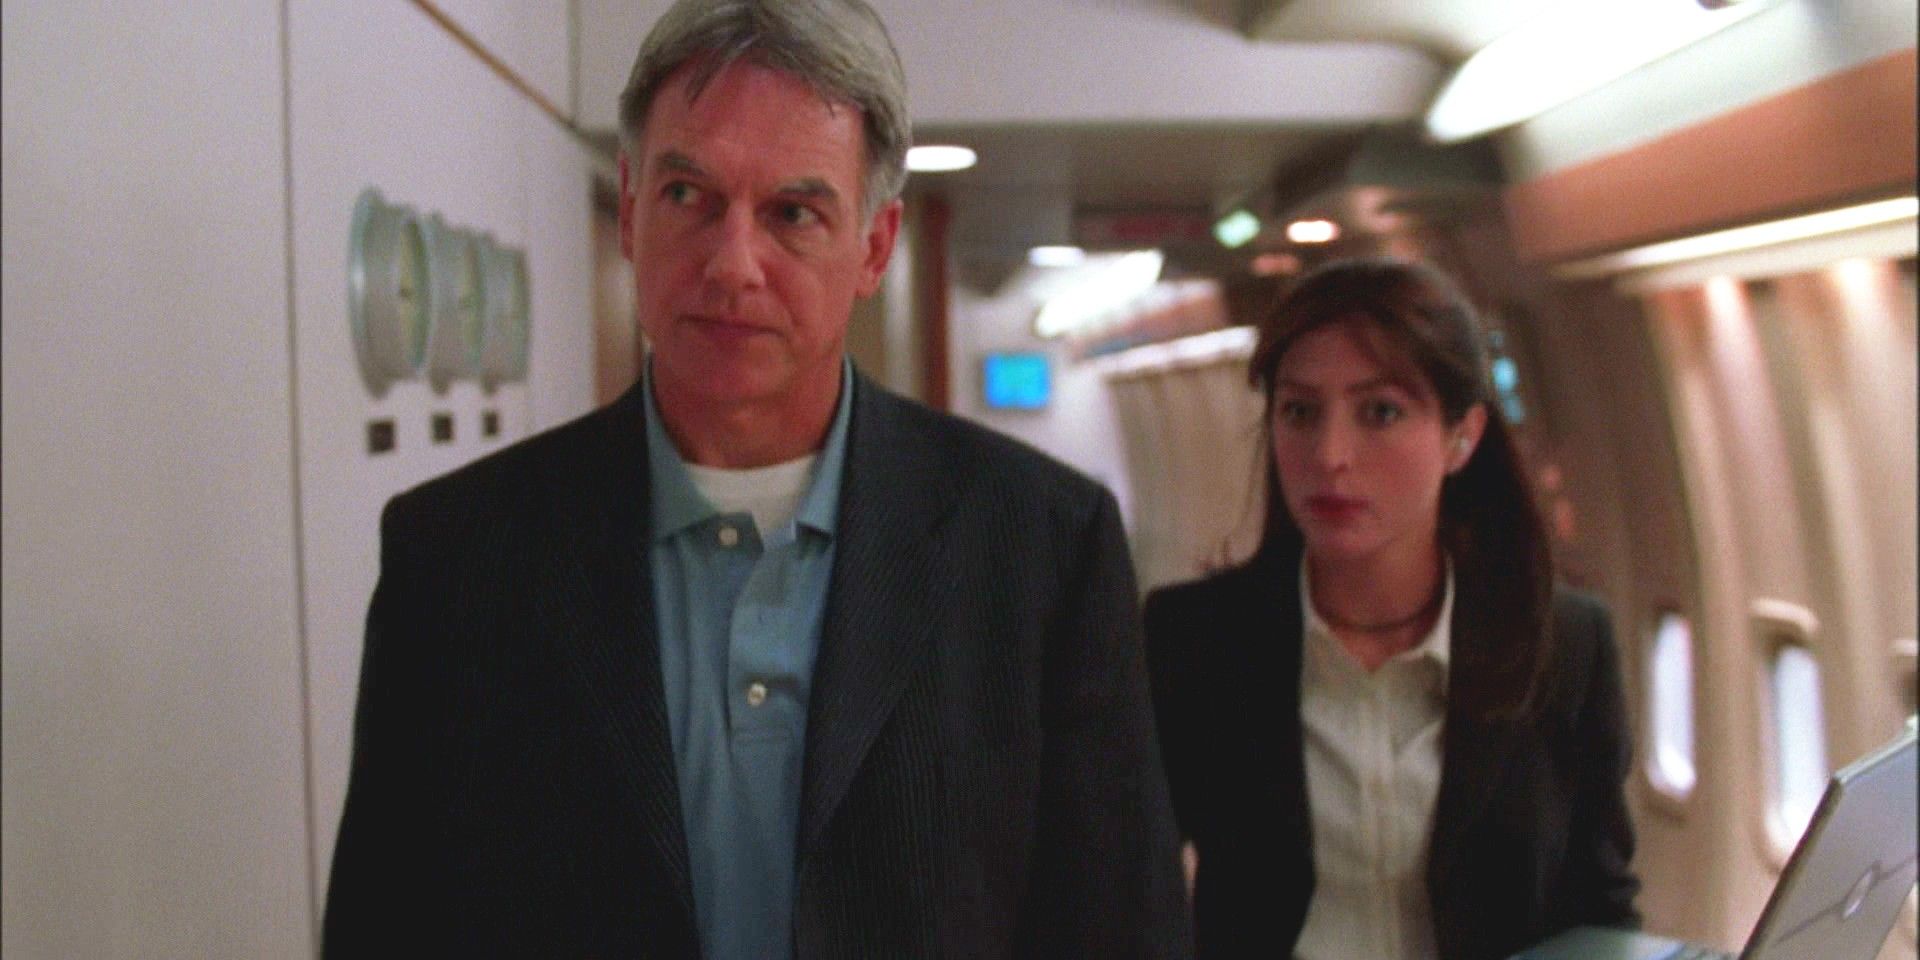 Leroy Jethro Gibbs and Caitlin Todd walk swiftly aboard Air Force One